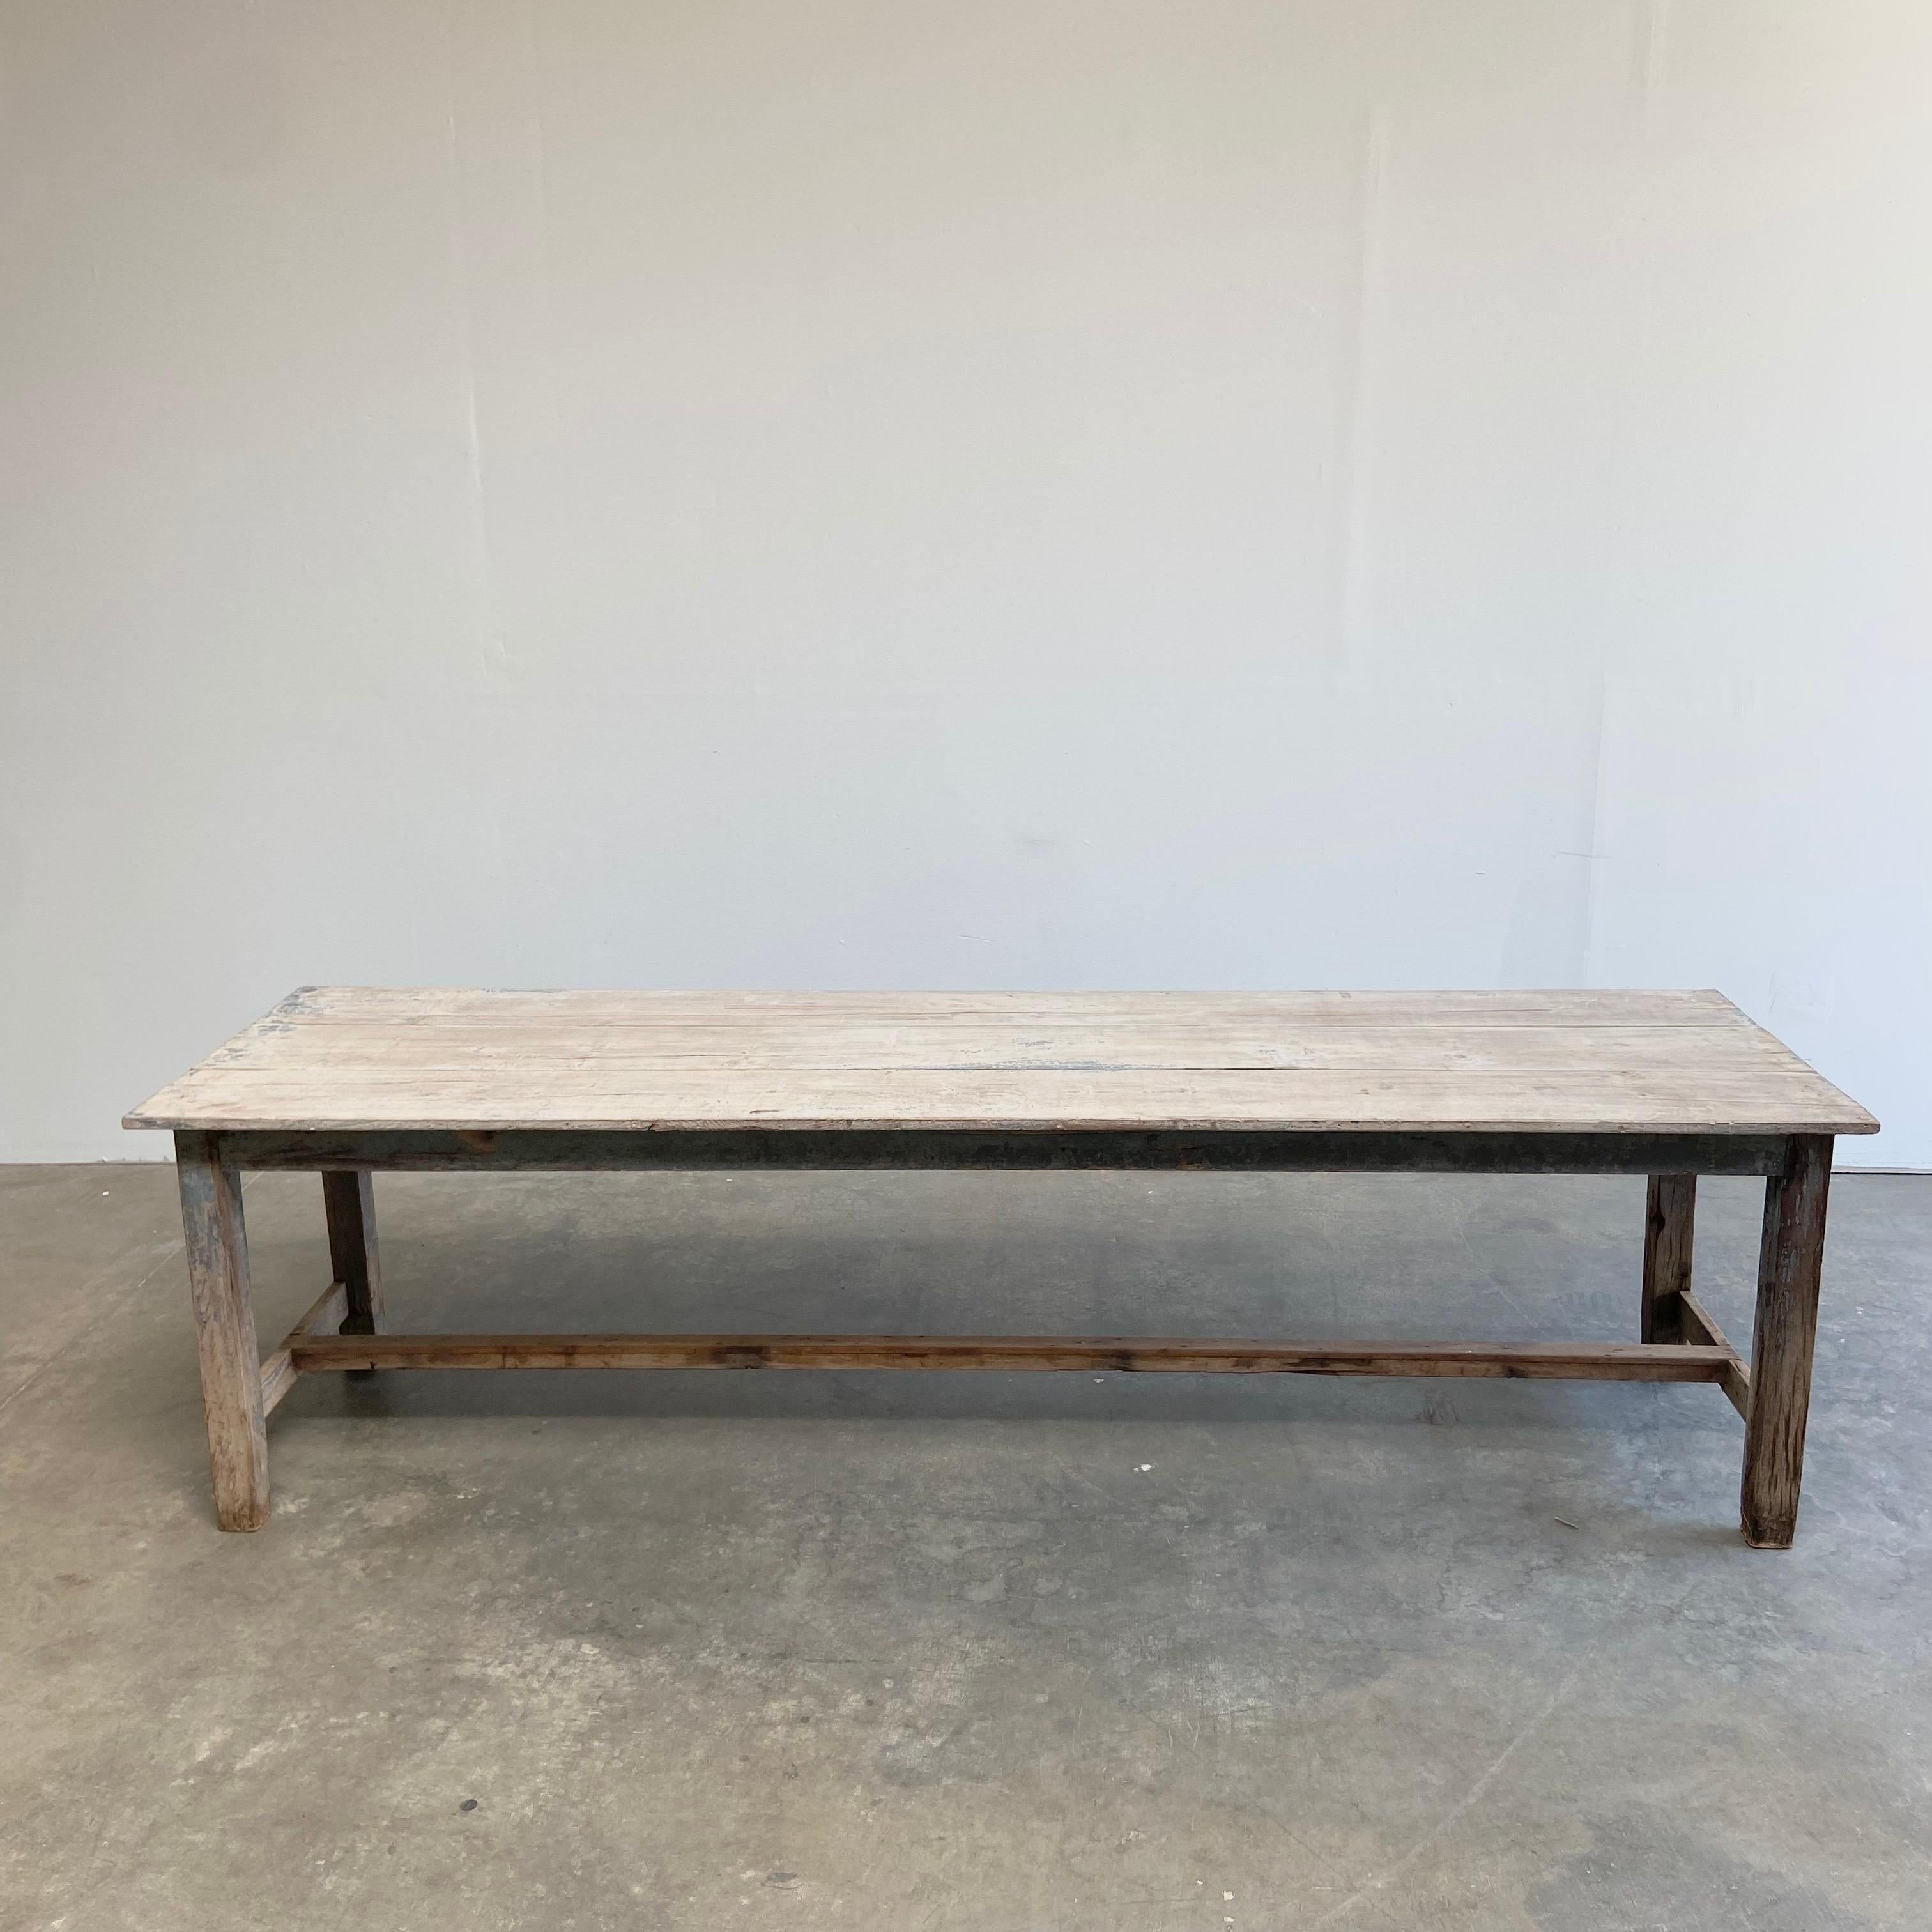 Vintage Plank Wood Farm Table with Original Paint In Good Condition For Sale In Brea, CA